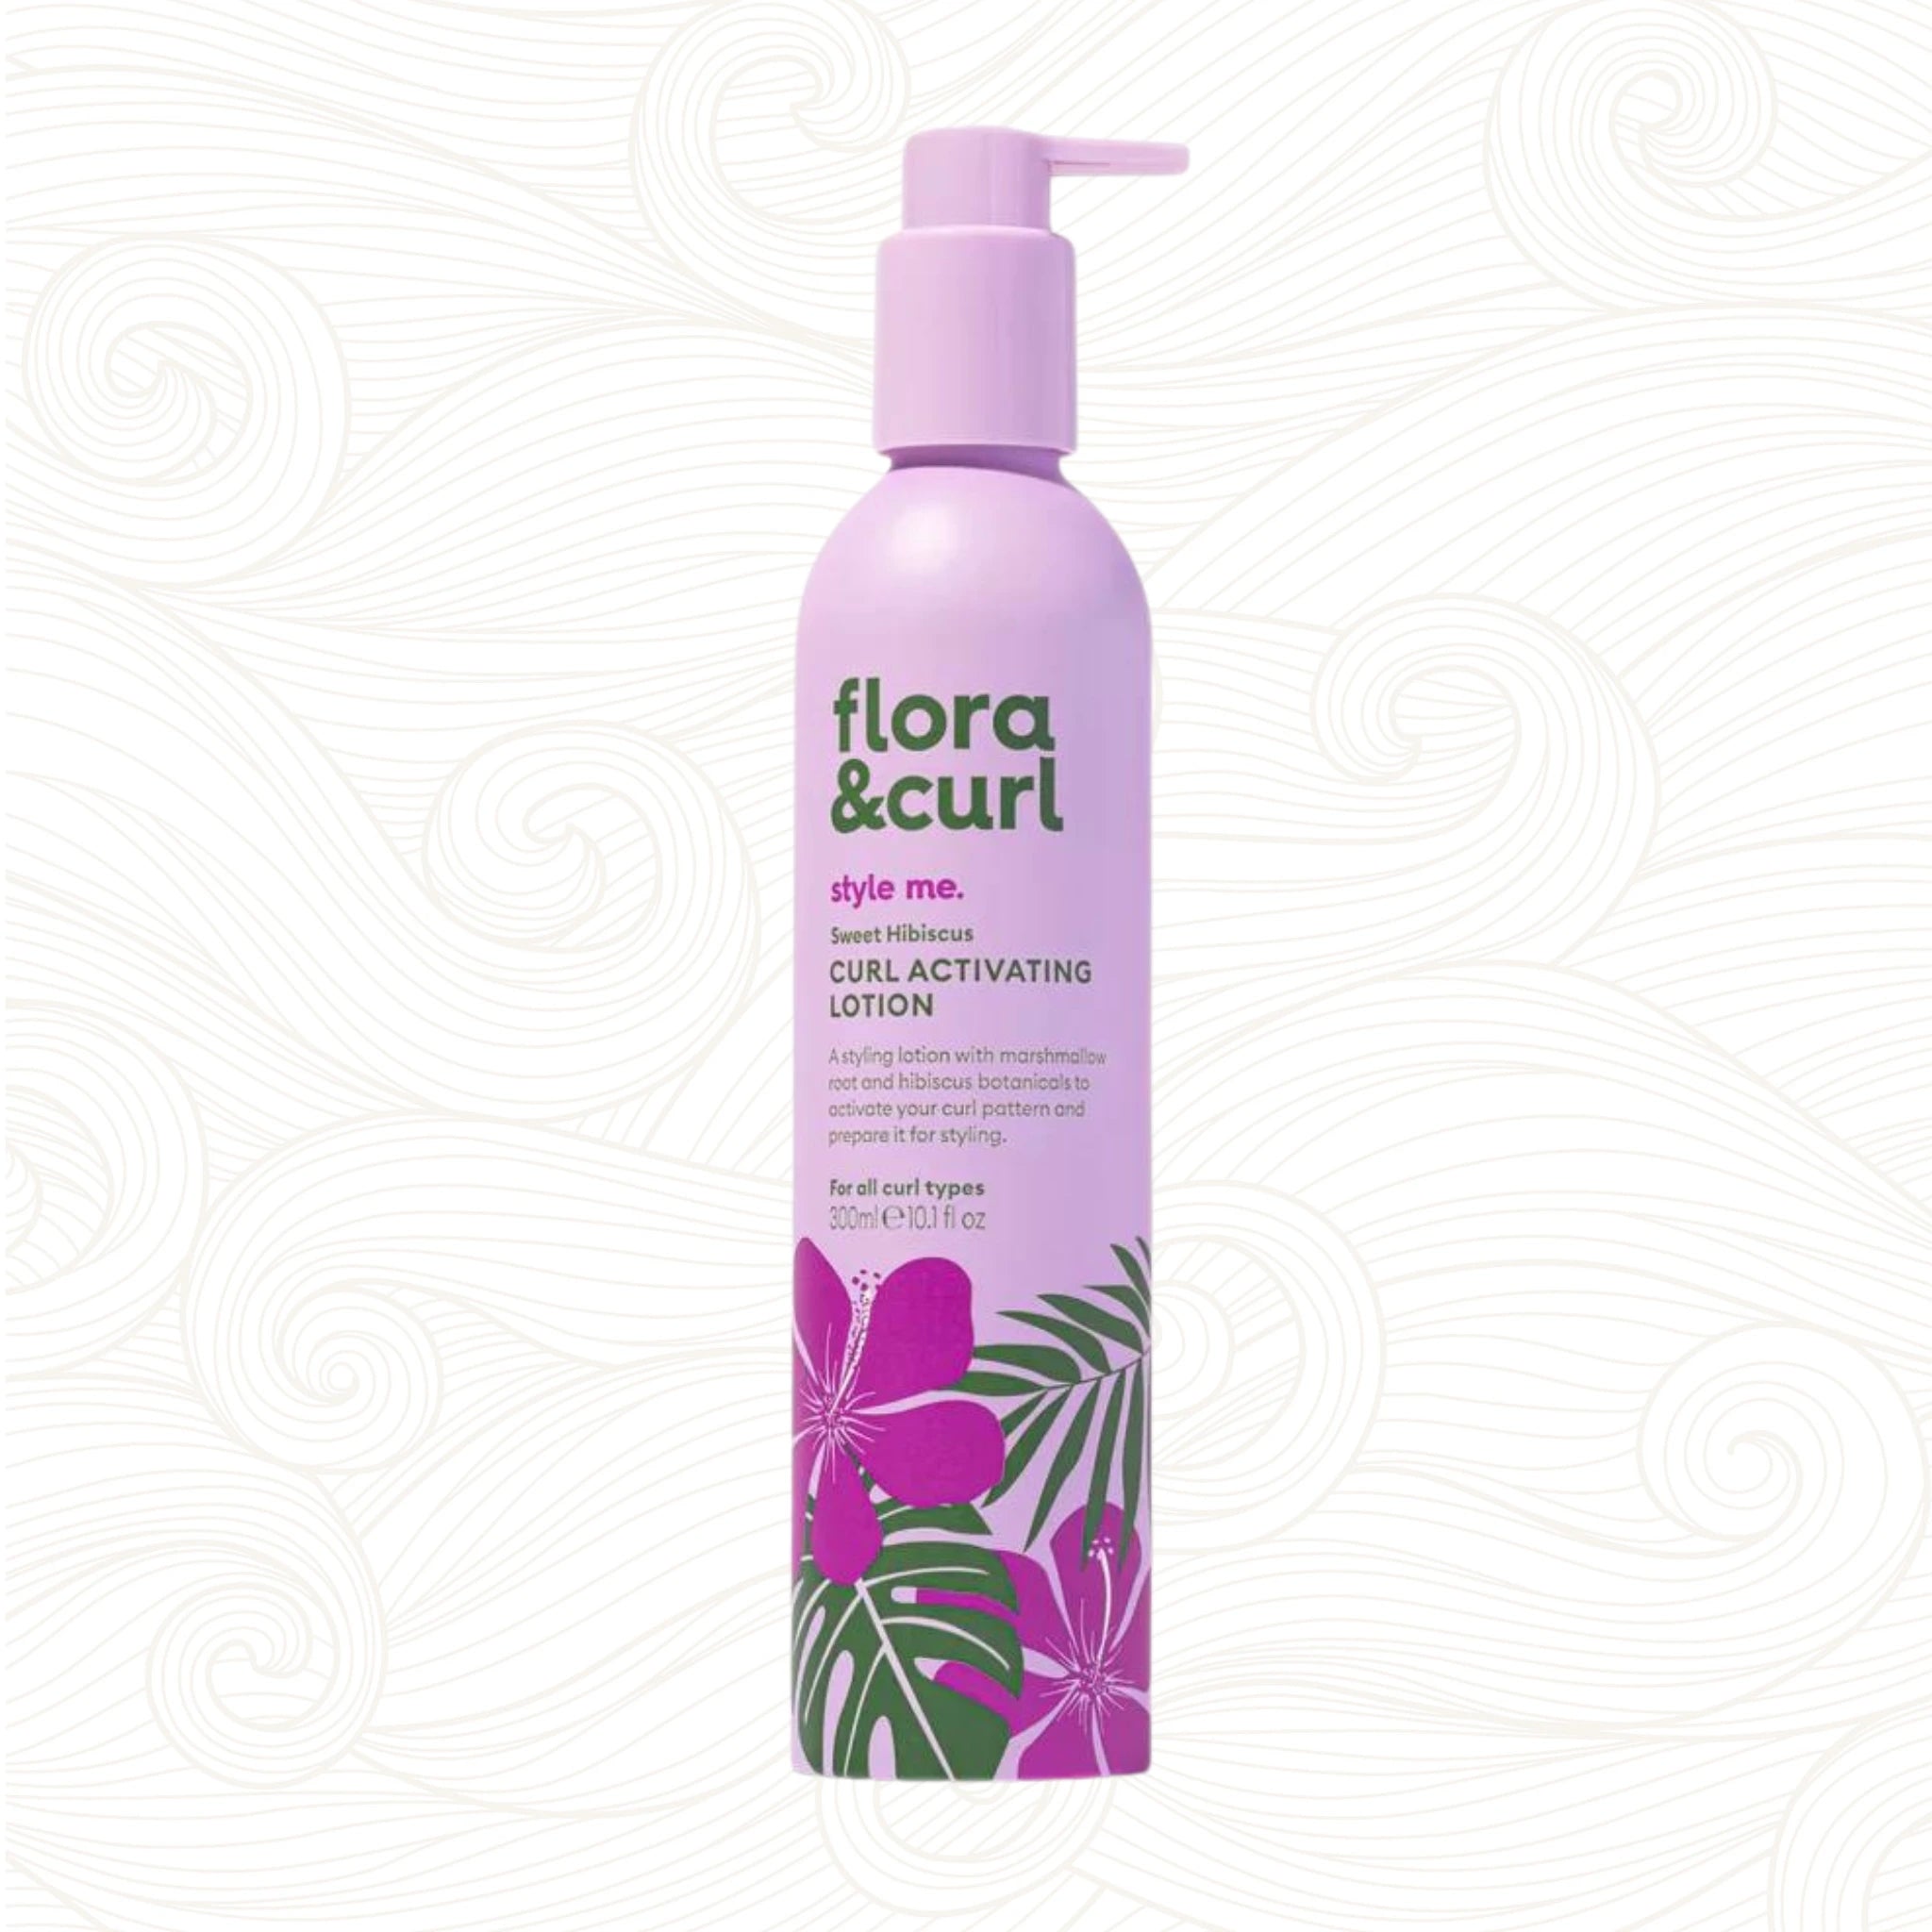 Flora & Curl | Sweet Hibiscus Curl Activating Lotion /ab 300ml